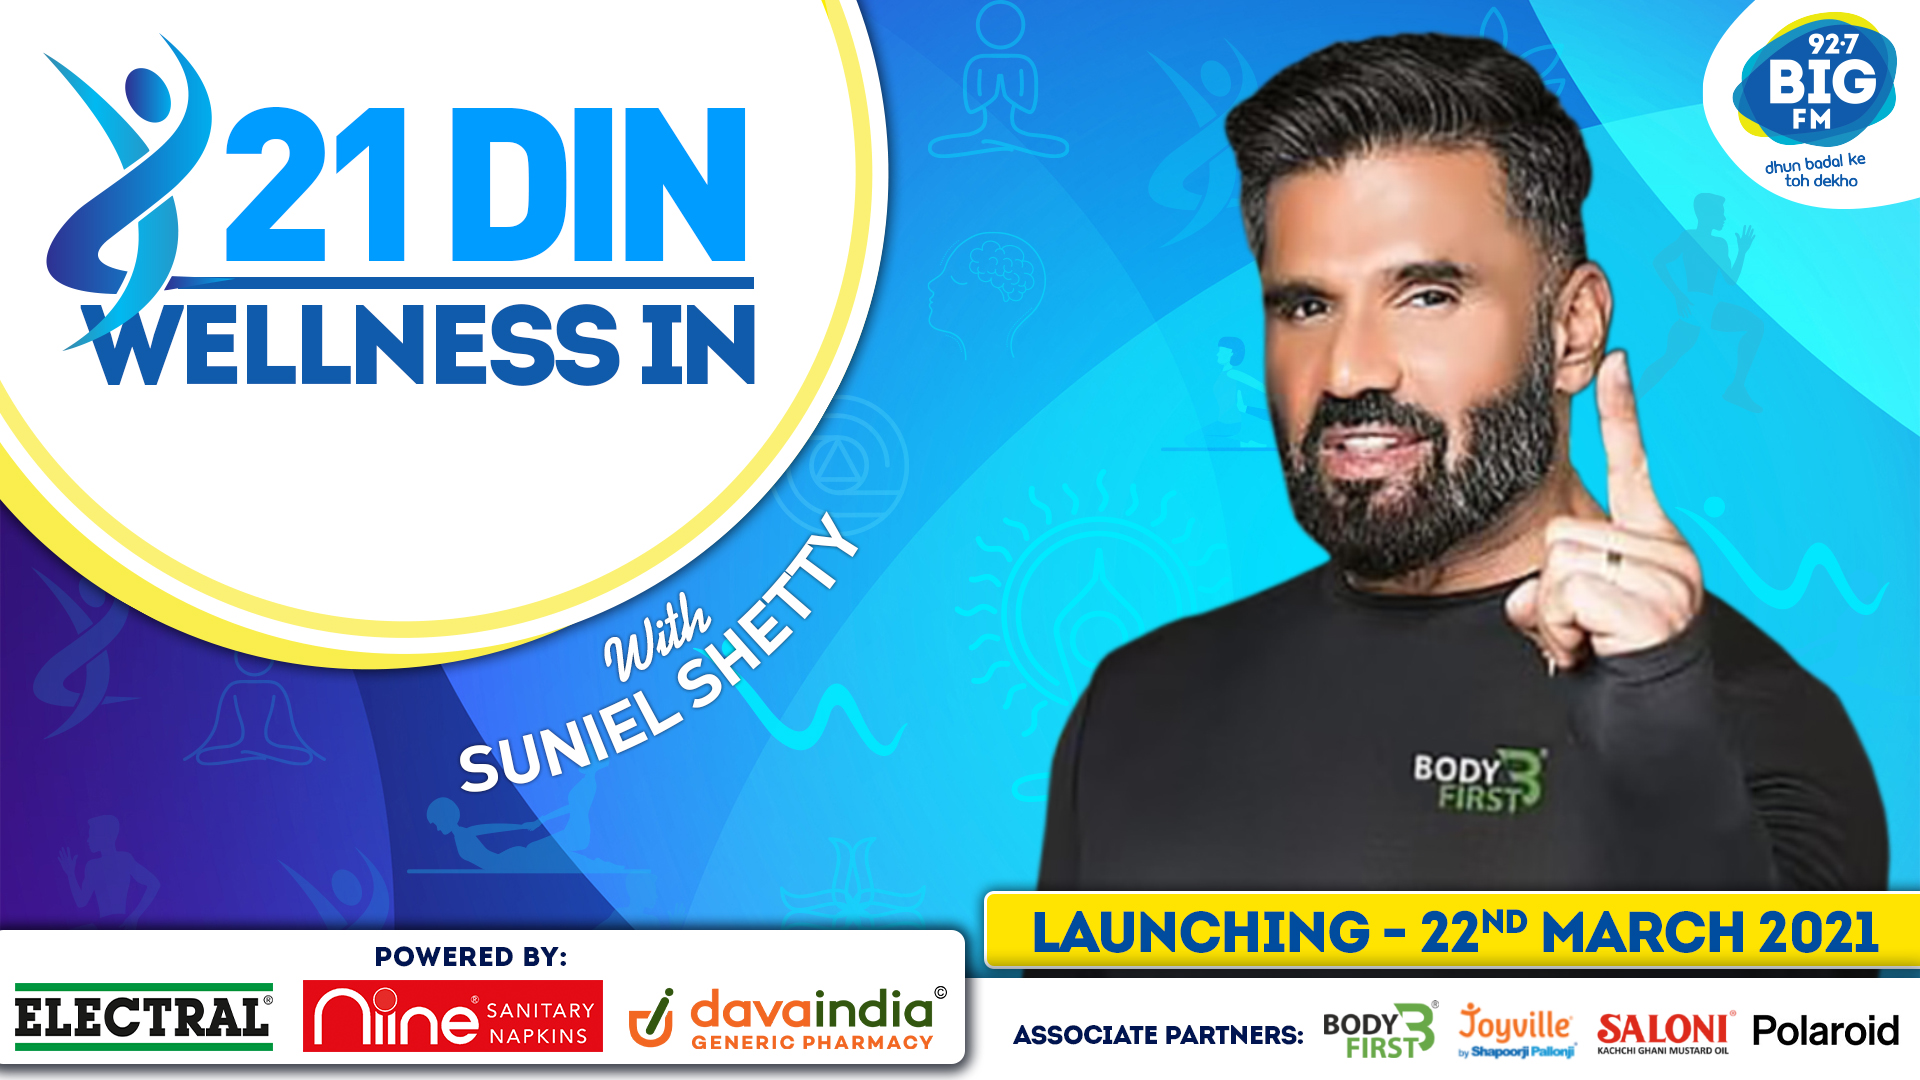 BIG FM launches new show 21 Din Wellness In with Suniel Shetty